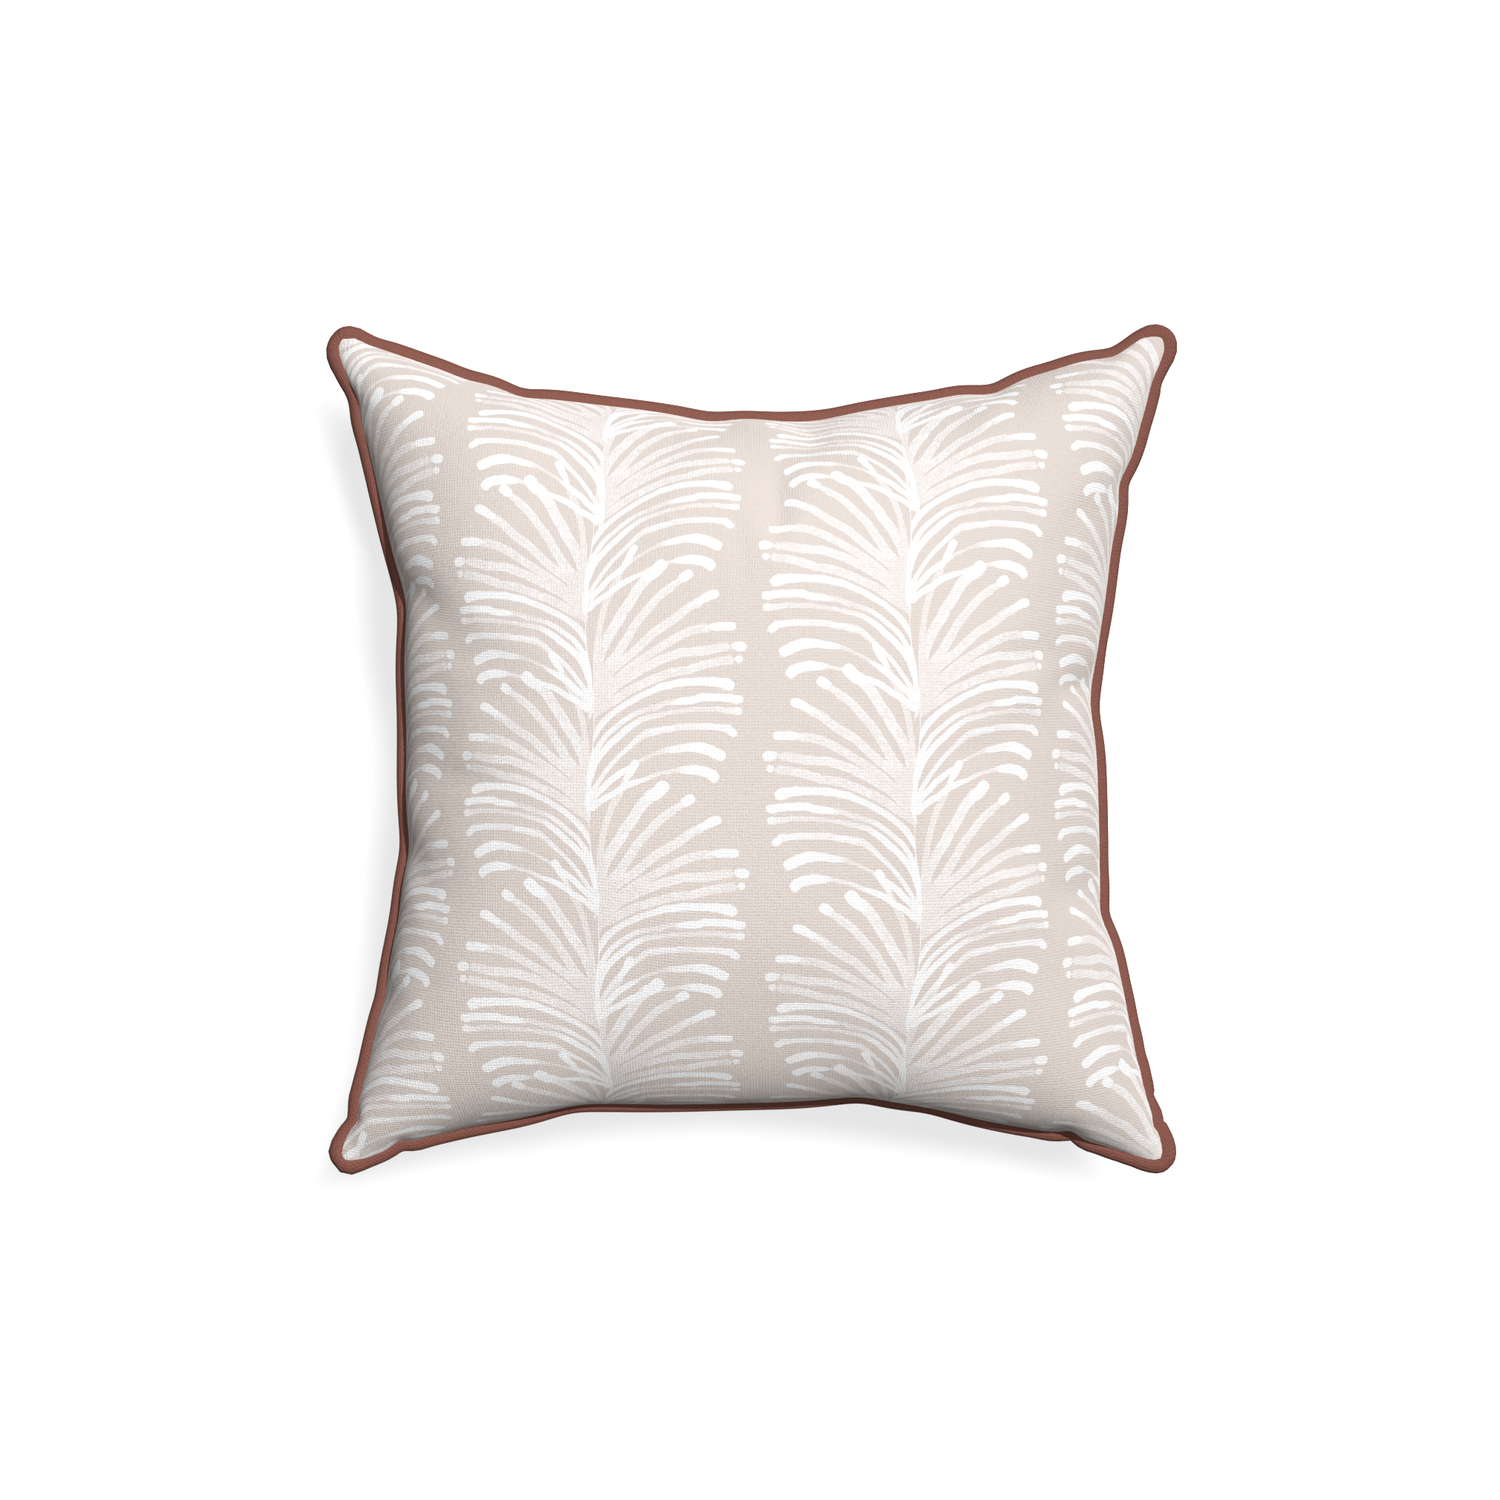 18-square emma sand custom sand colored botanical stripepillow with w piping on white background